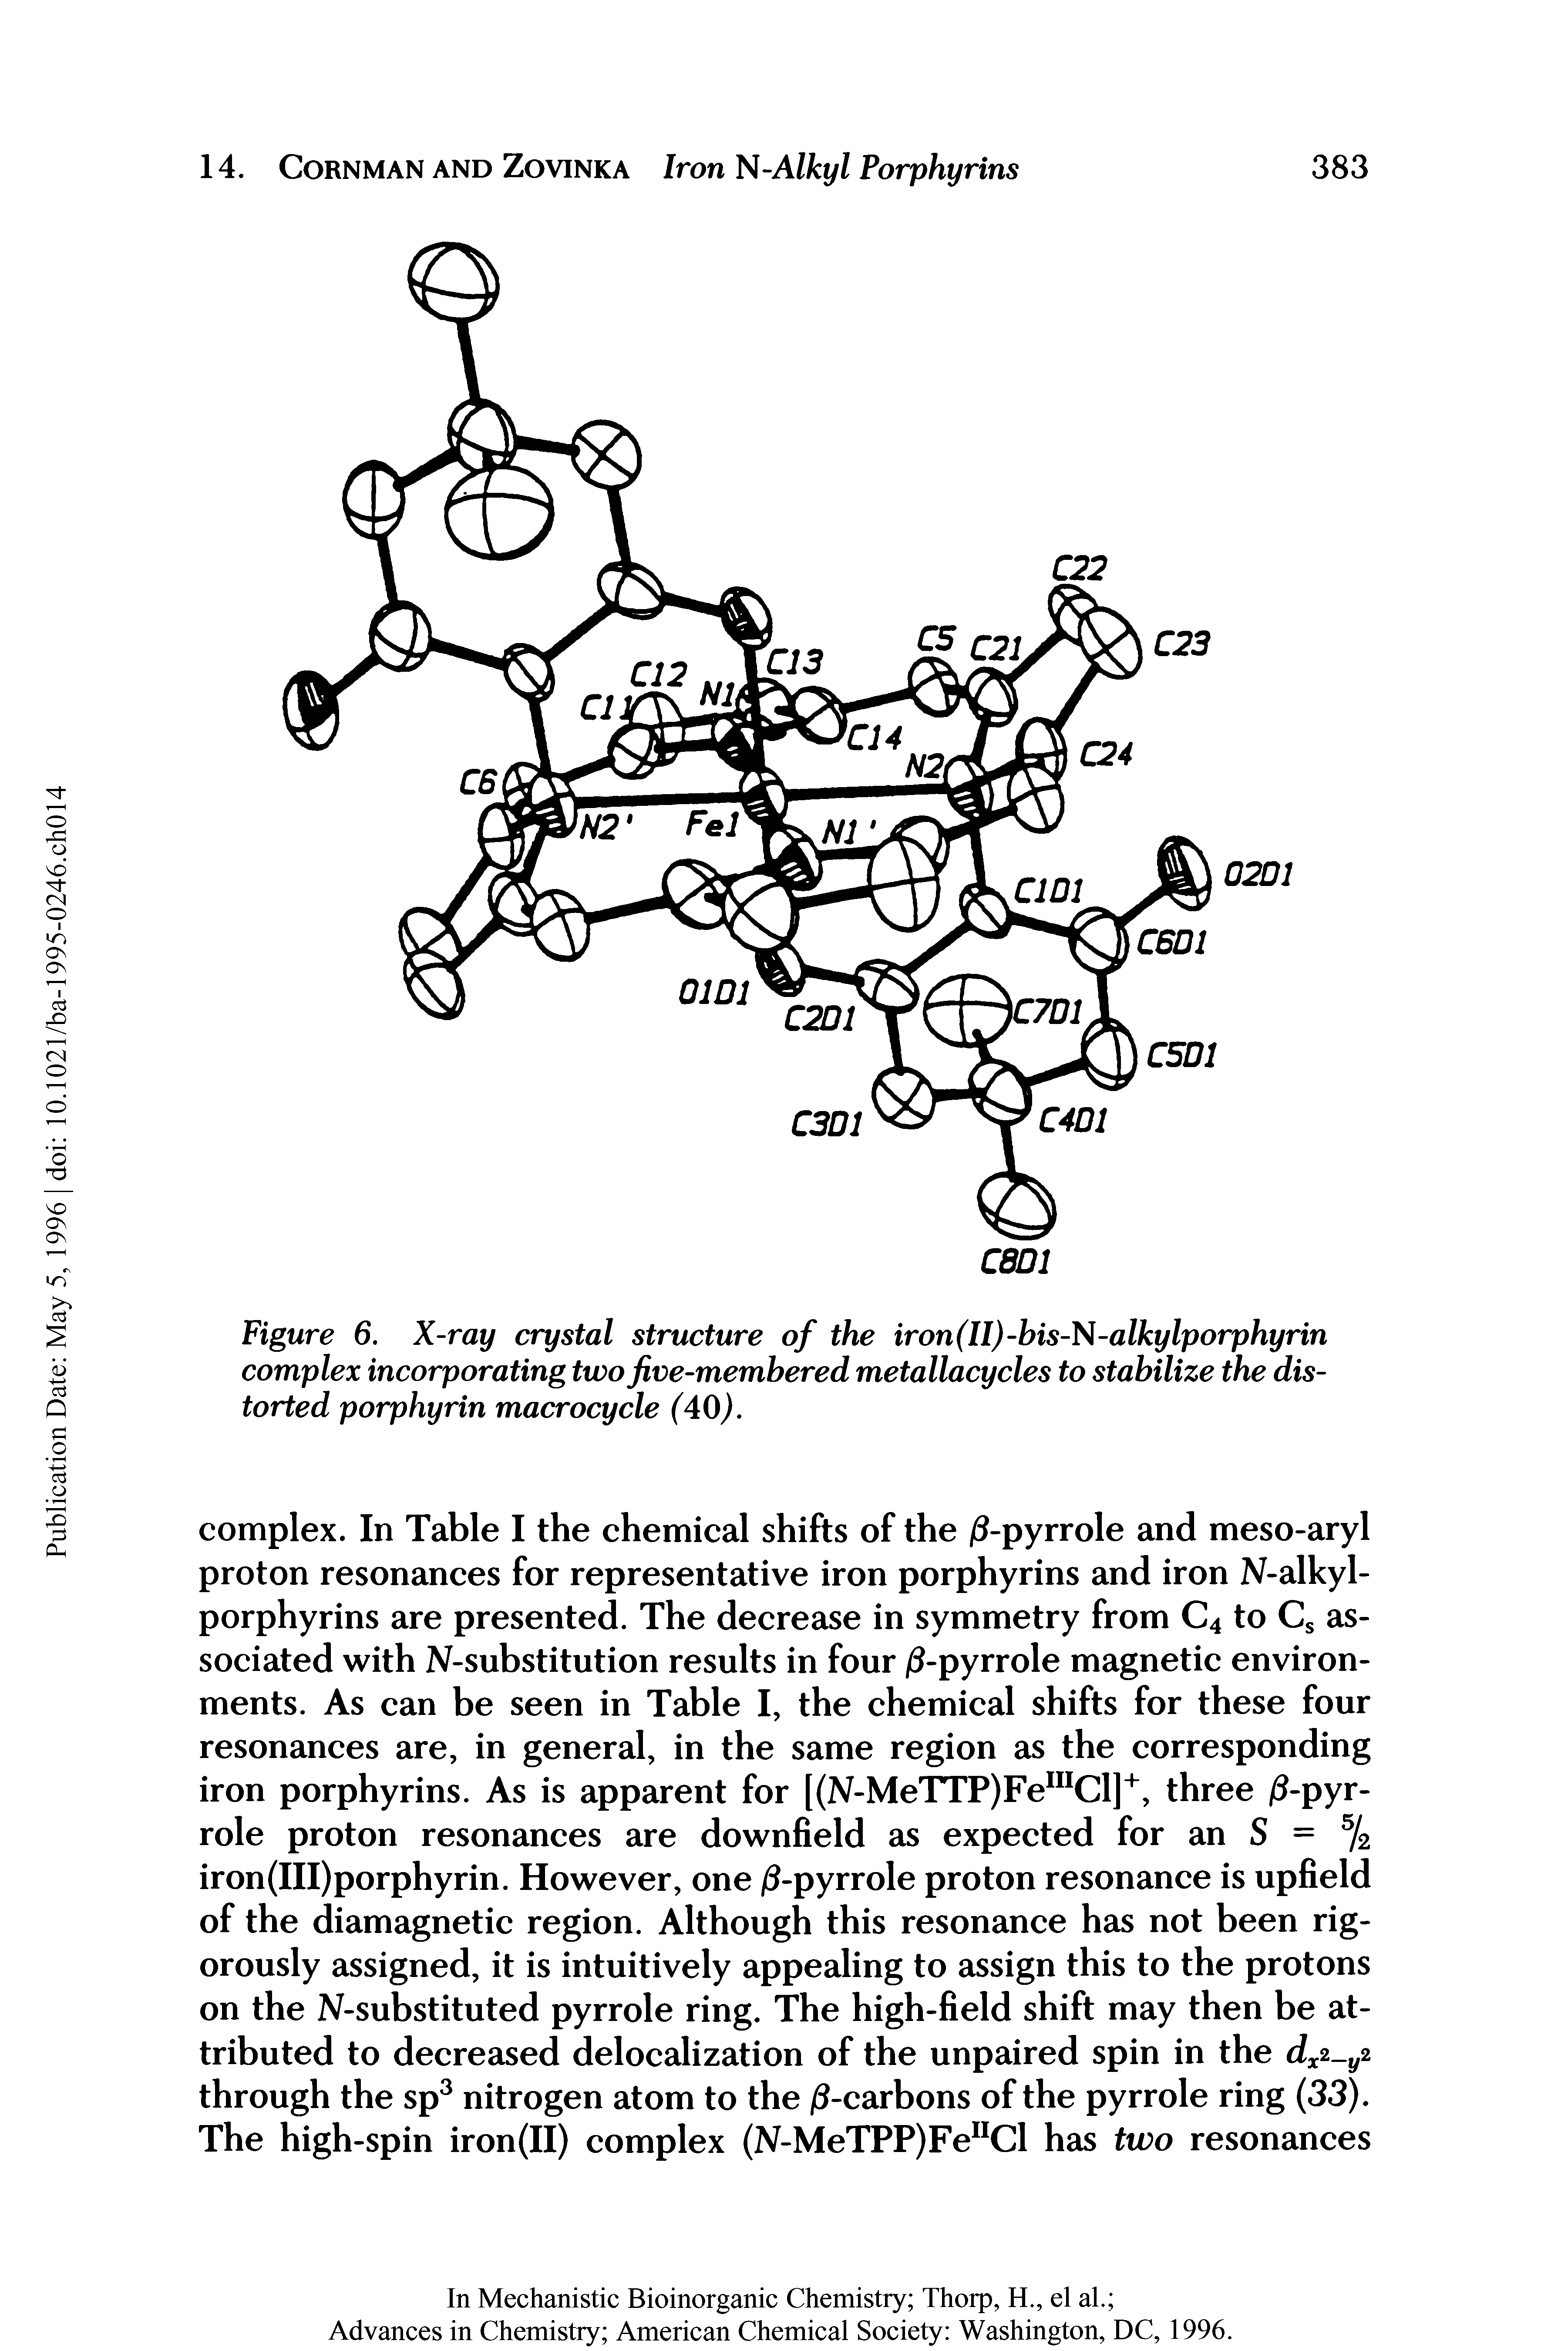 Figure 6. X-ray crystal structure of the iron(II)-bis-N-alkylporphyrin complex incorporating twofive-membered metallacycles to stabilize the distorted porphyrin macrocycle (40).